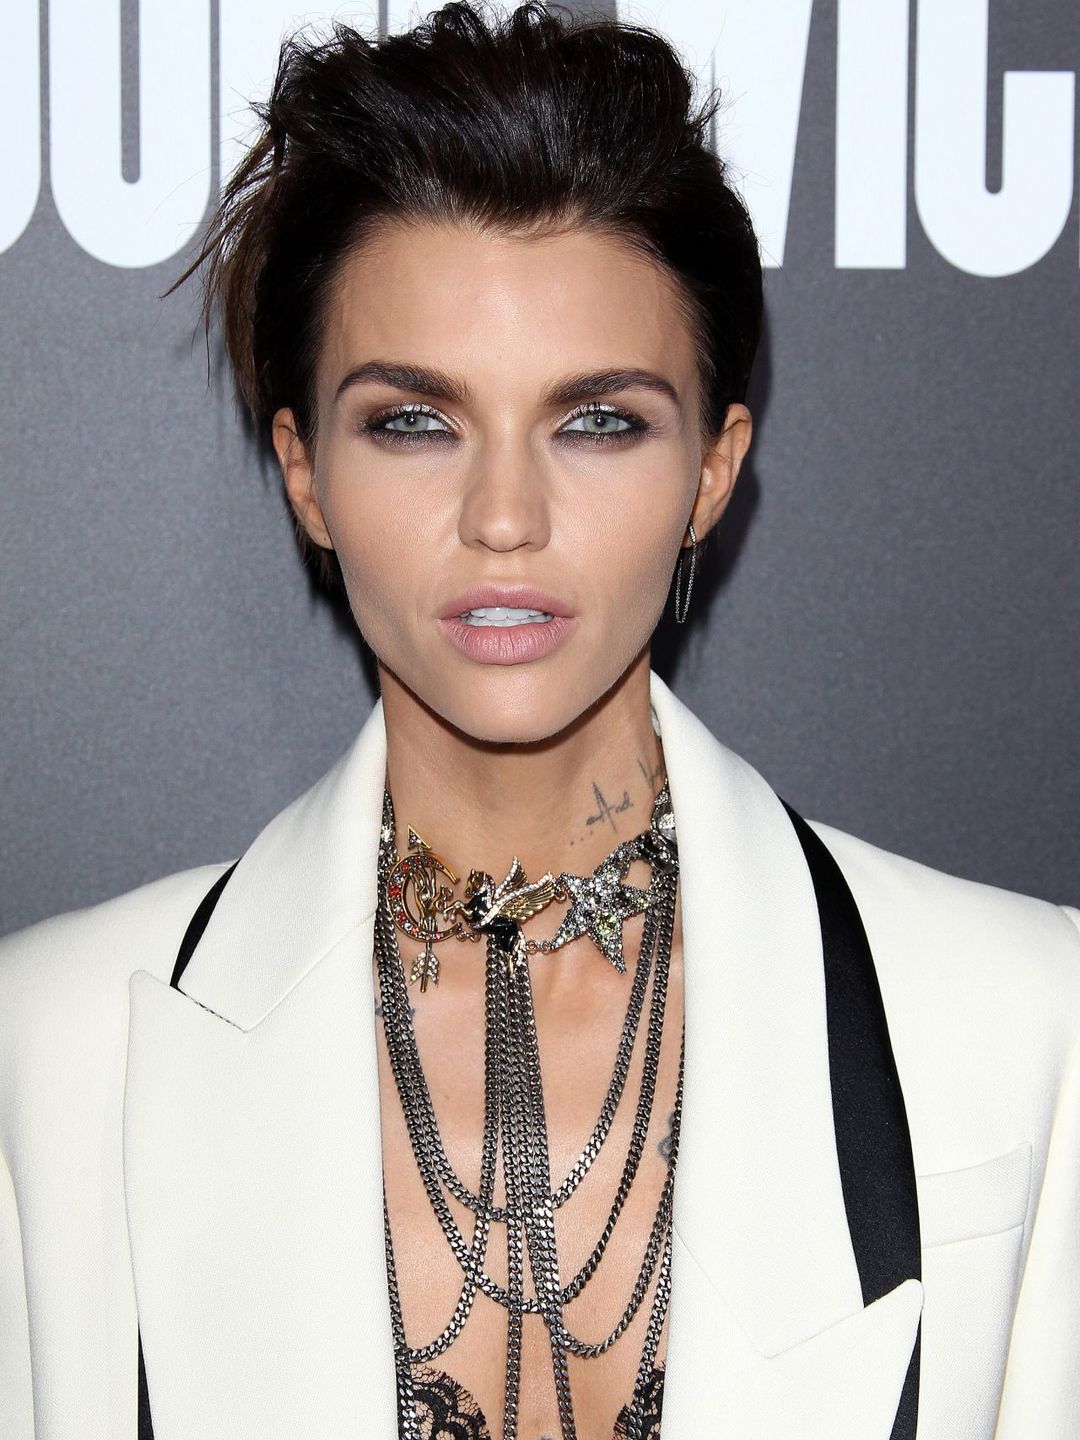 Ruby Rose who is her mother